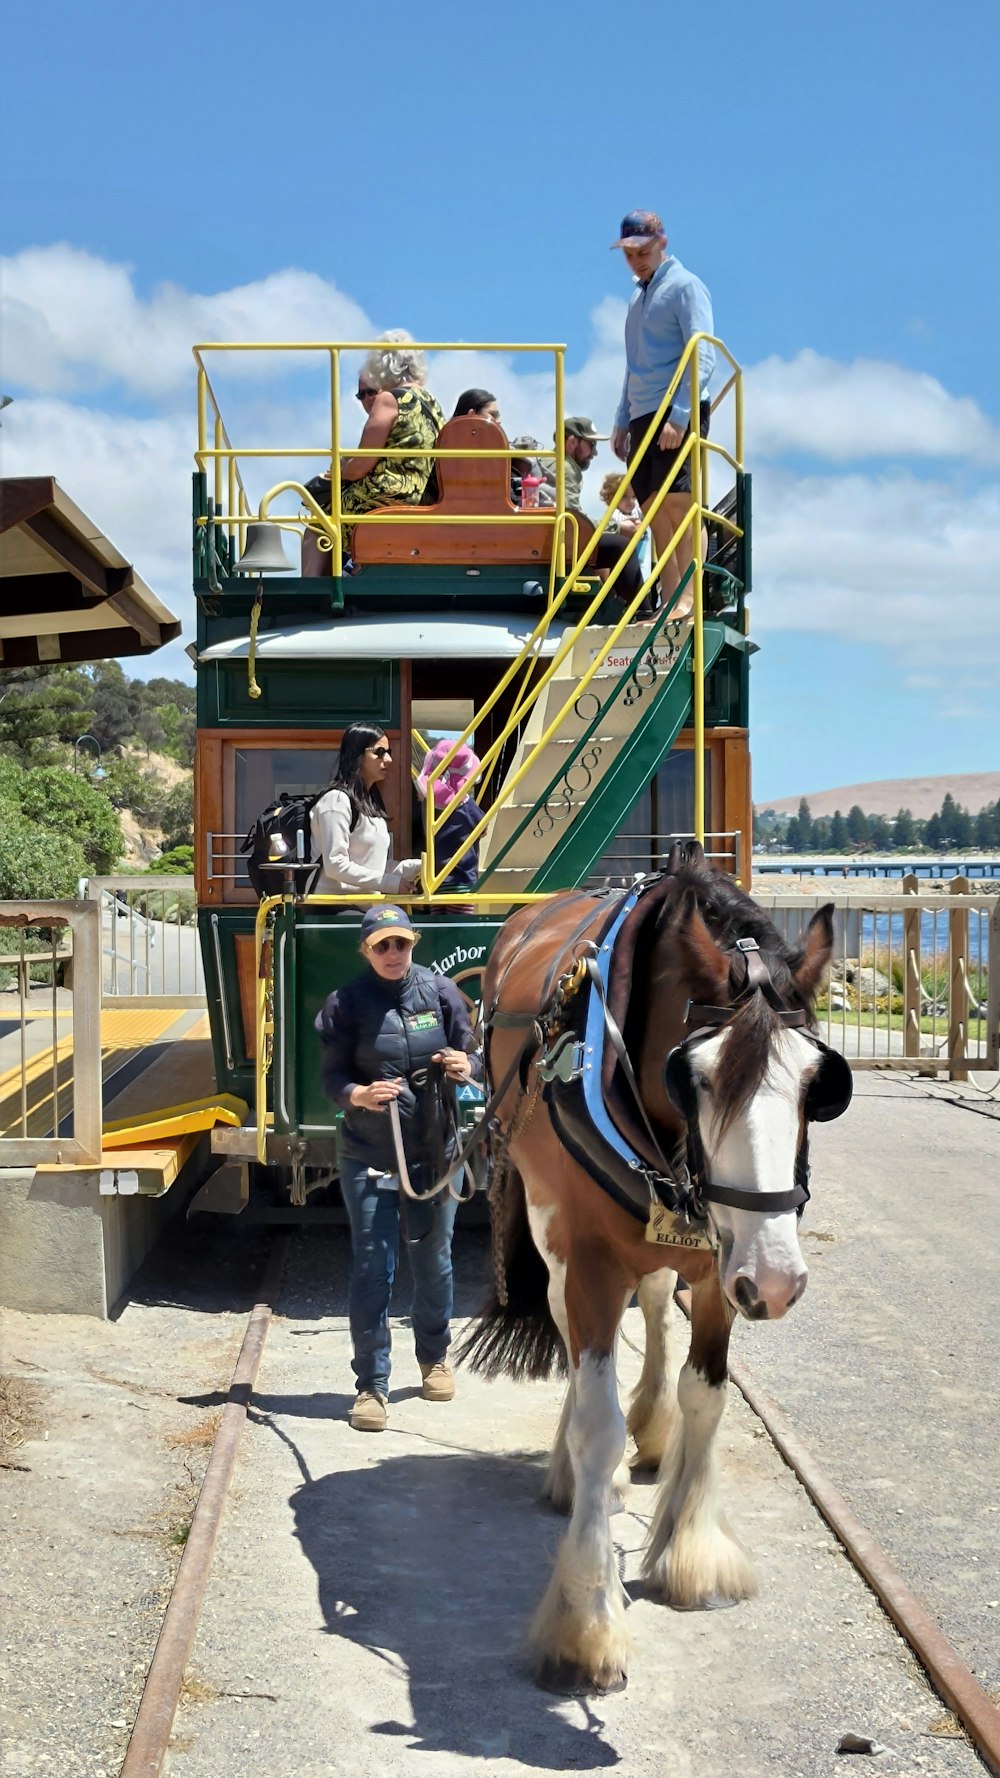 a horse pulling a trolley with people on it